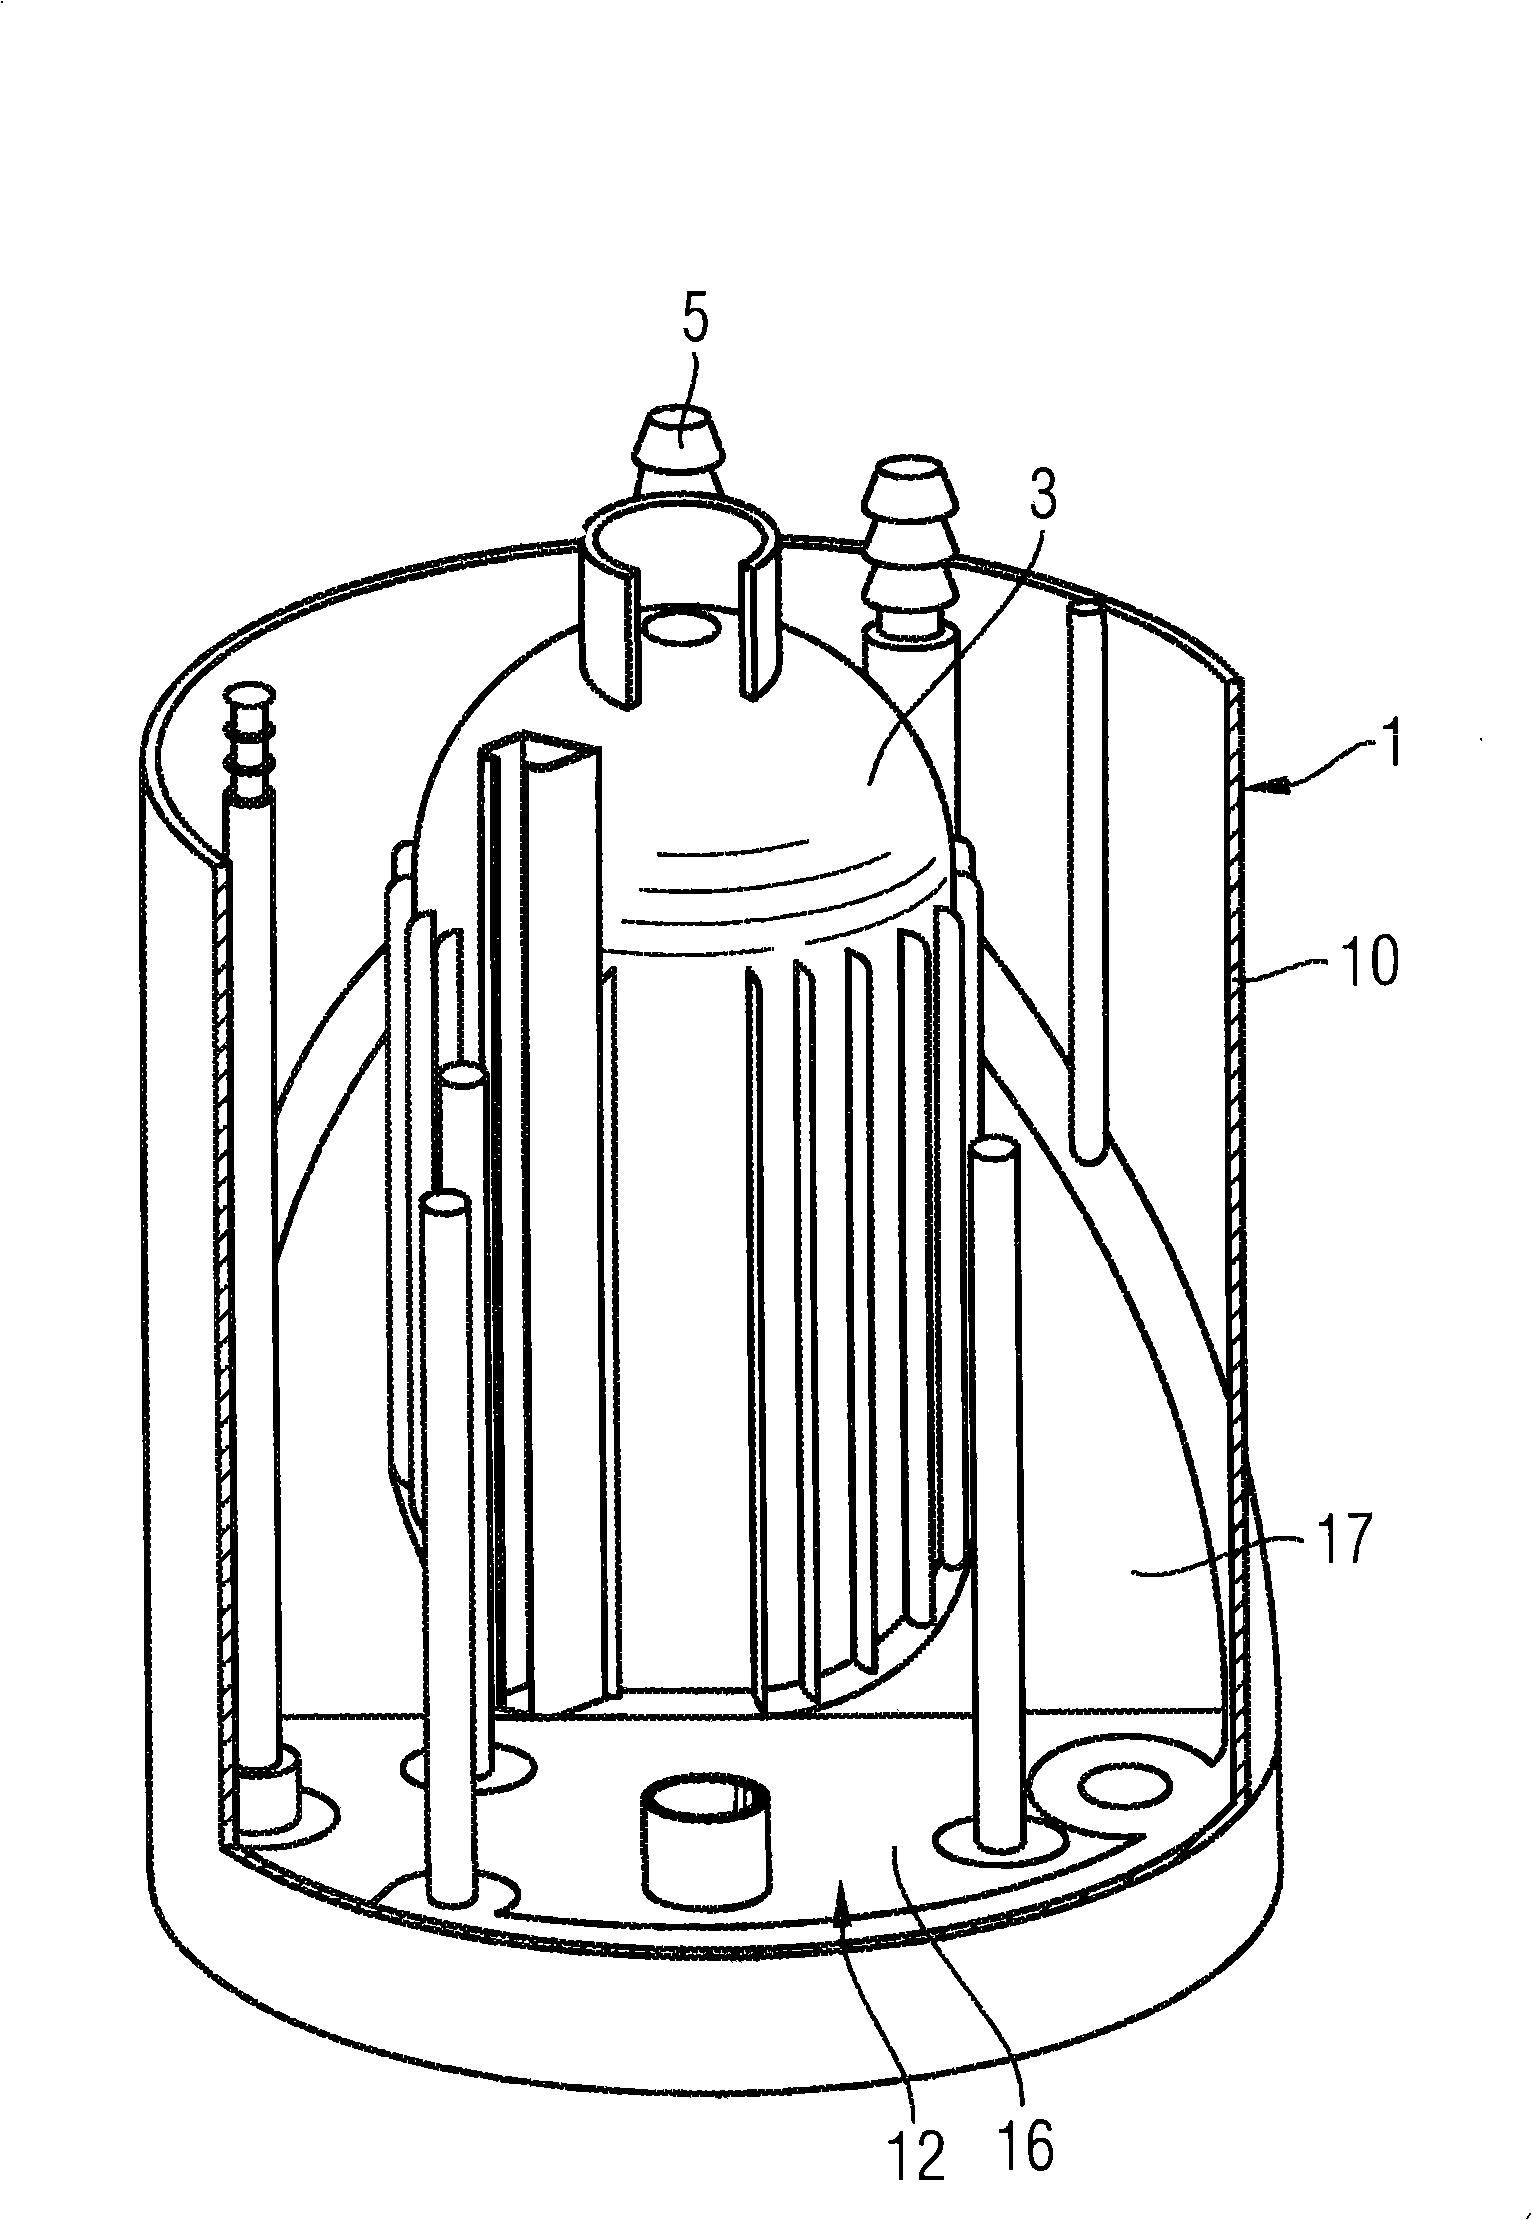 Device for collecting fuel in a fuel tank